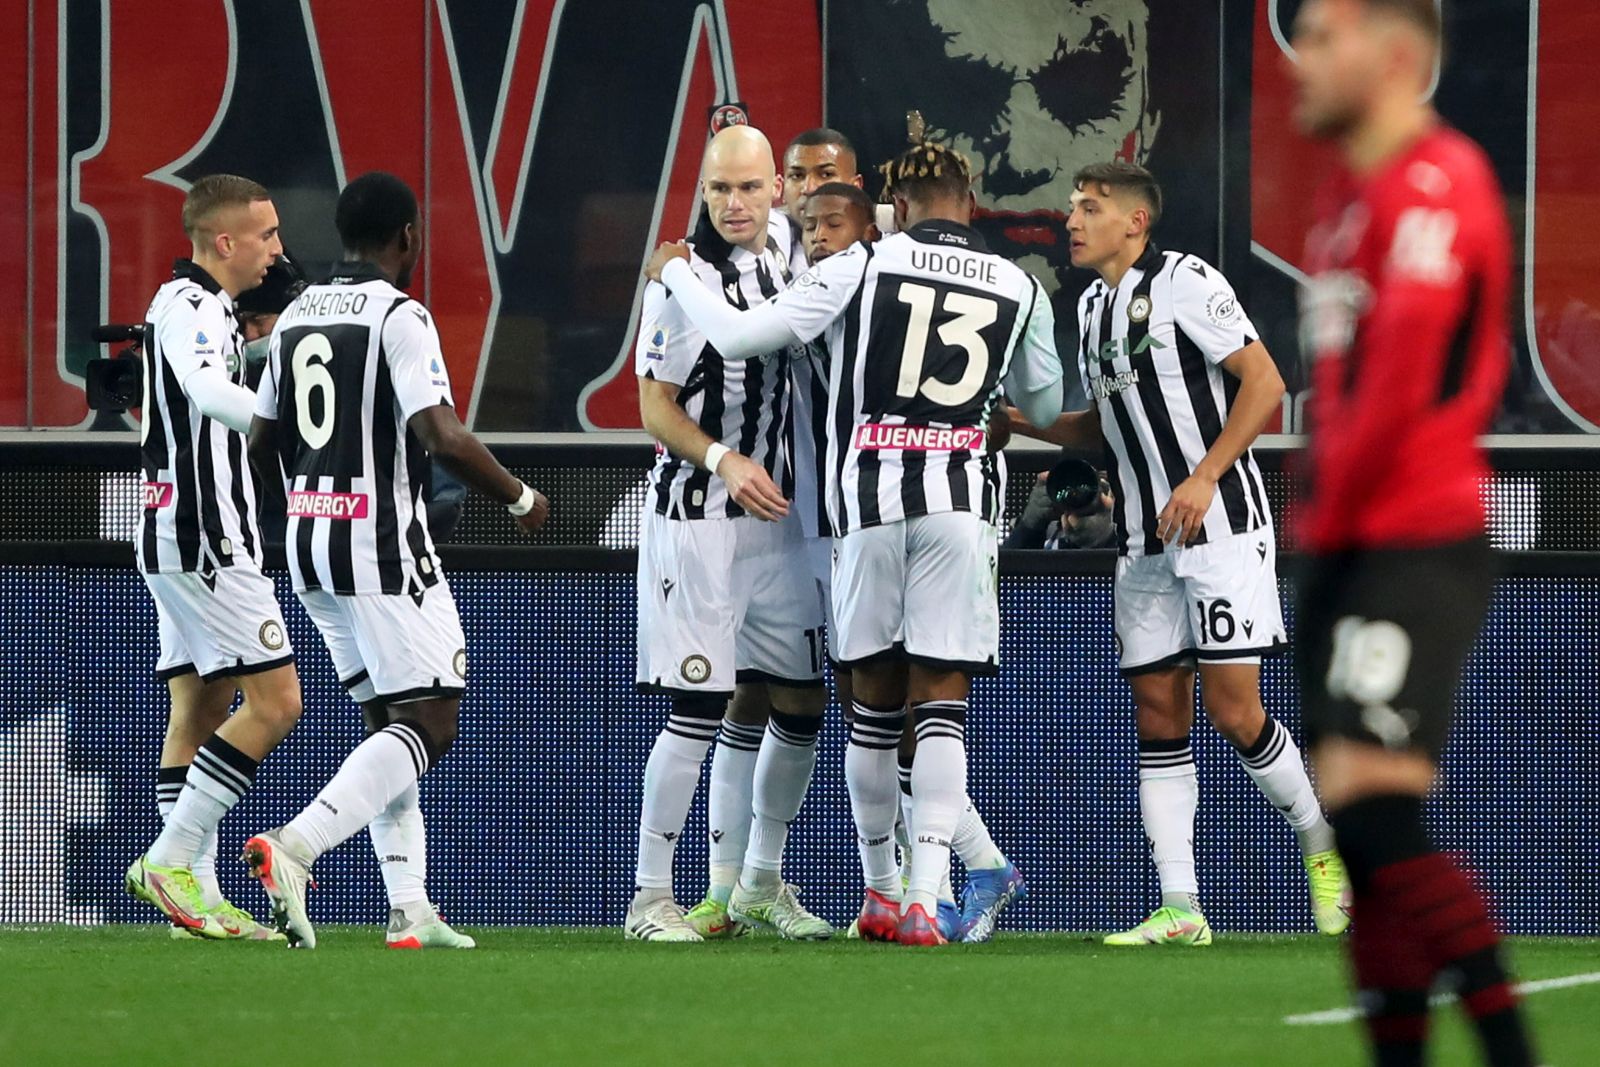 epa09637383 Udinese's Norberto Beto (C) celebrated by his teammates after scoring a goal during the Italian Serie A soccer match Udinese Calcio vs AC Milan at the Friuli - Dacia Arena stadium in Udine, Italy, 11 December 2021.  EPA/GABRIELE MENIS